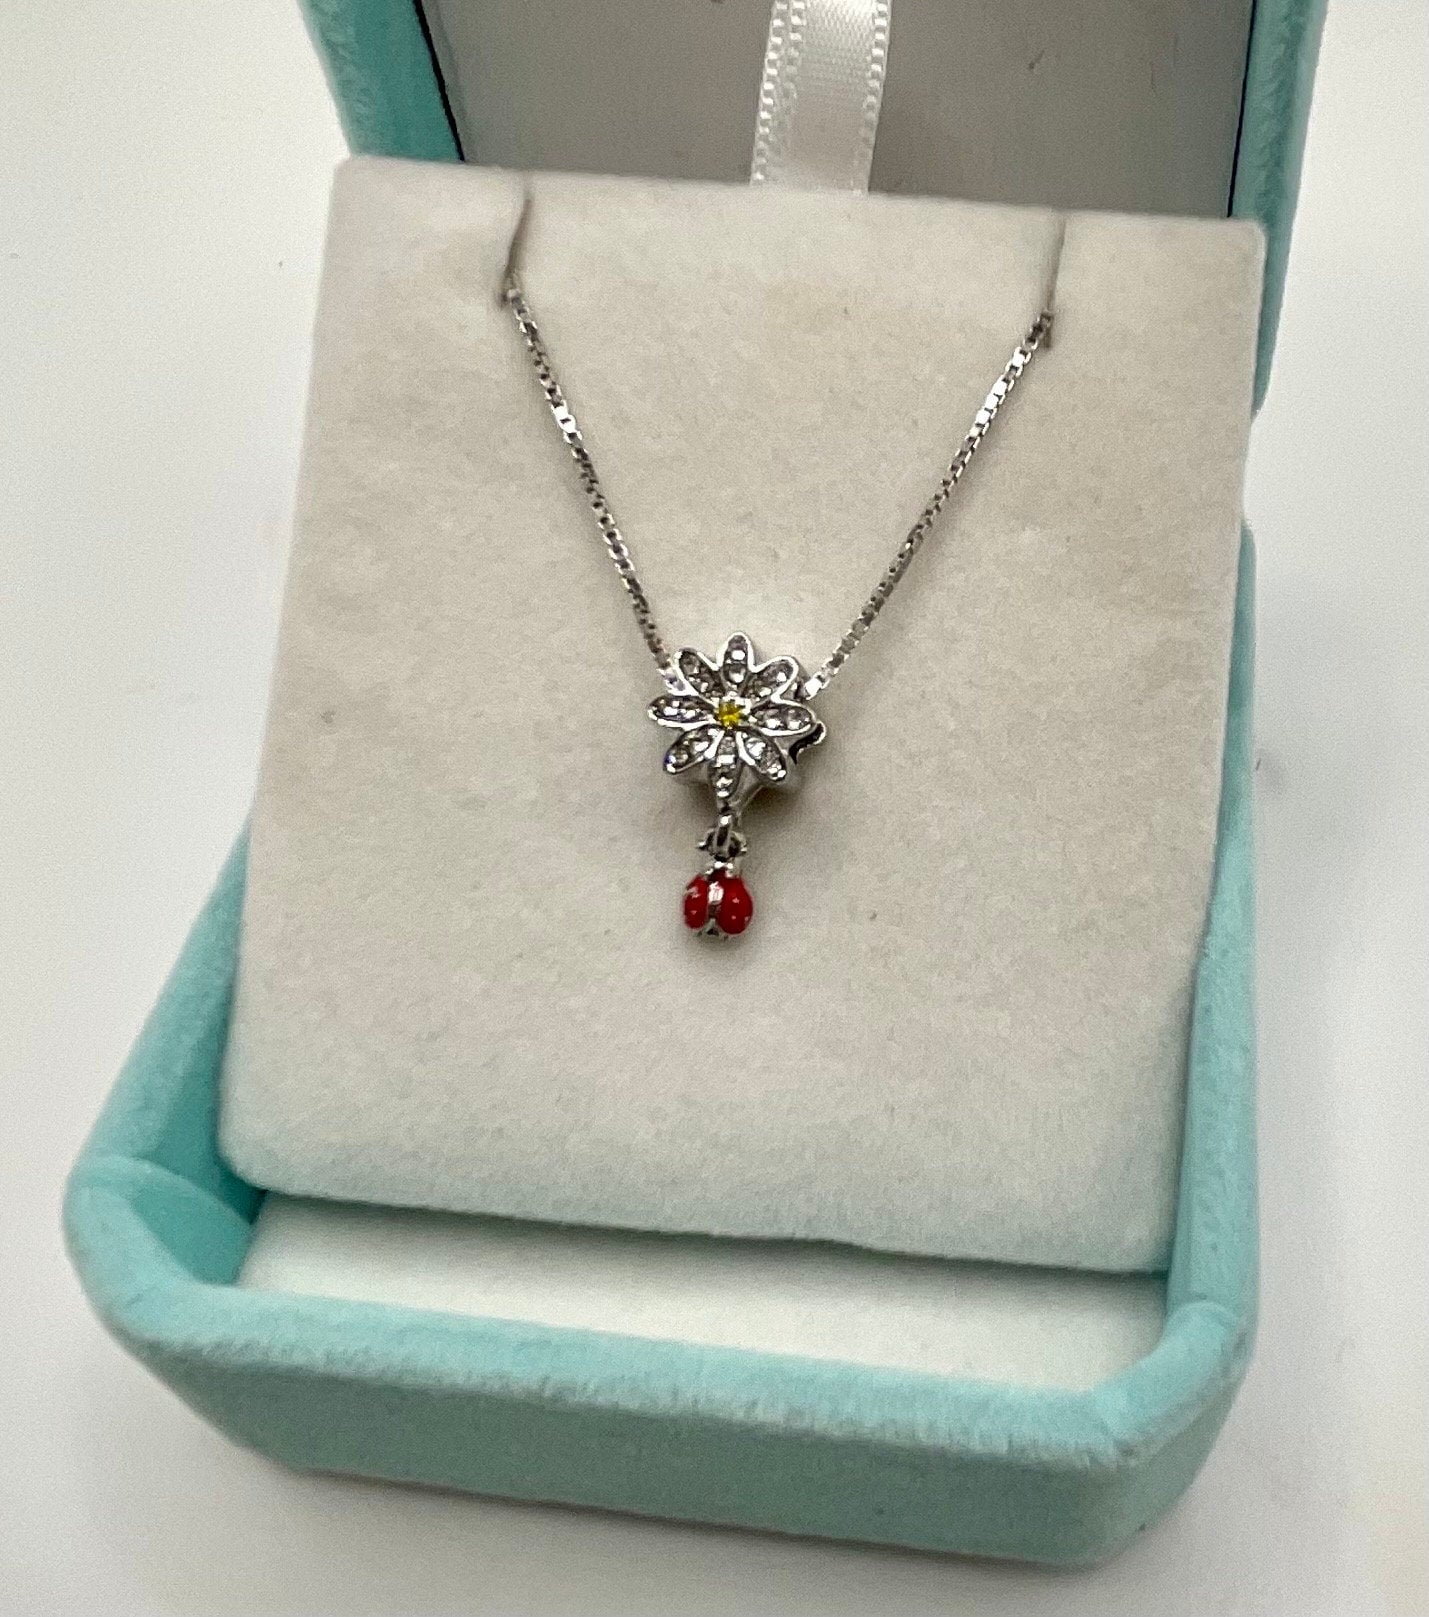 Sunflower Ladybug Rhinestone Necklace Pendant on an 18” Sterling Silver Box Chain